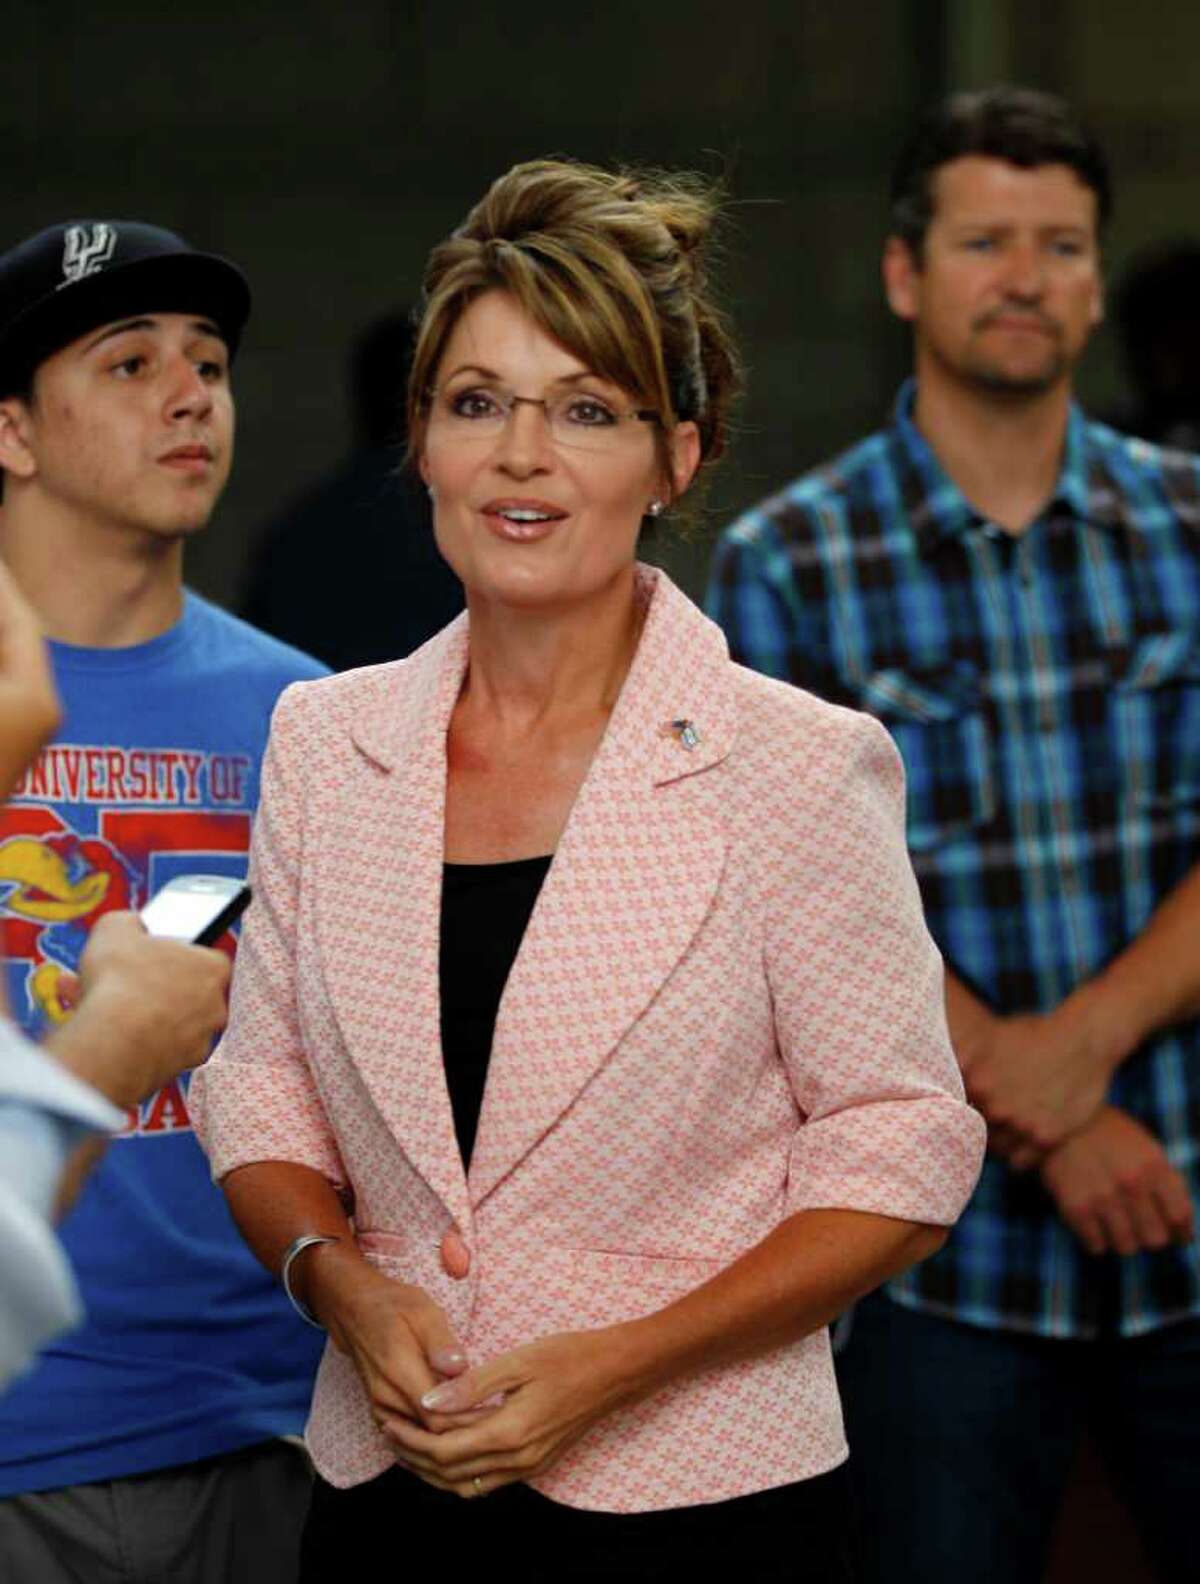 Sarah Palin is accompanied by her husband Todd (right) during a 2011 visit to Independence National Historical Park  in Philadelphia.